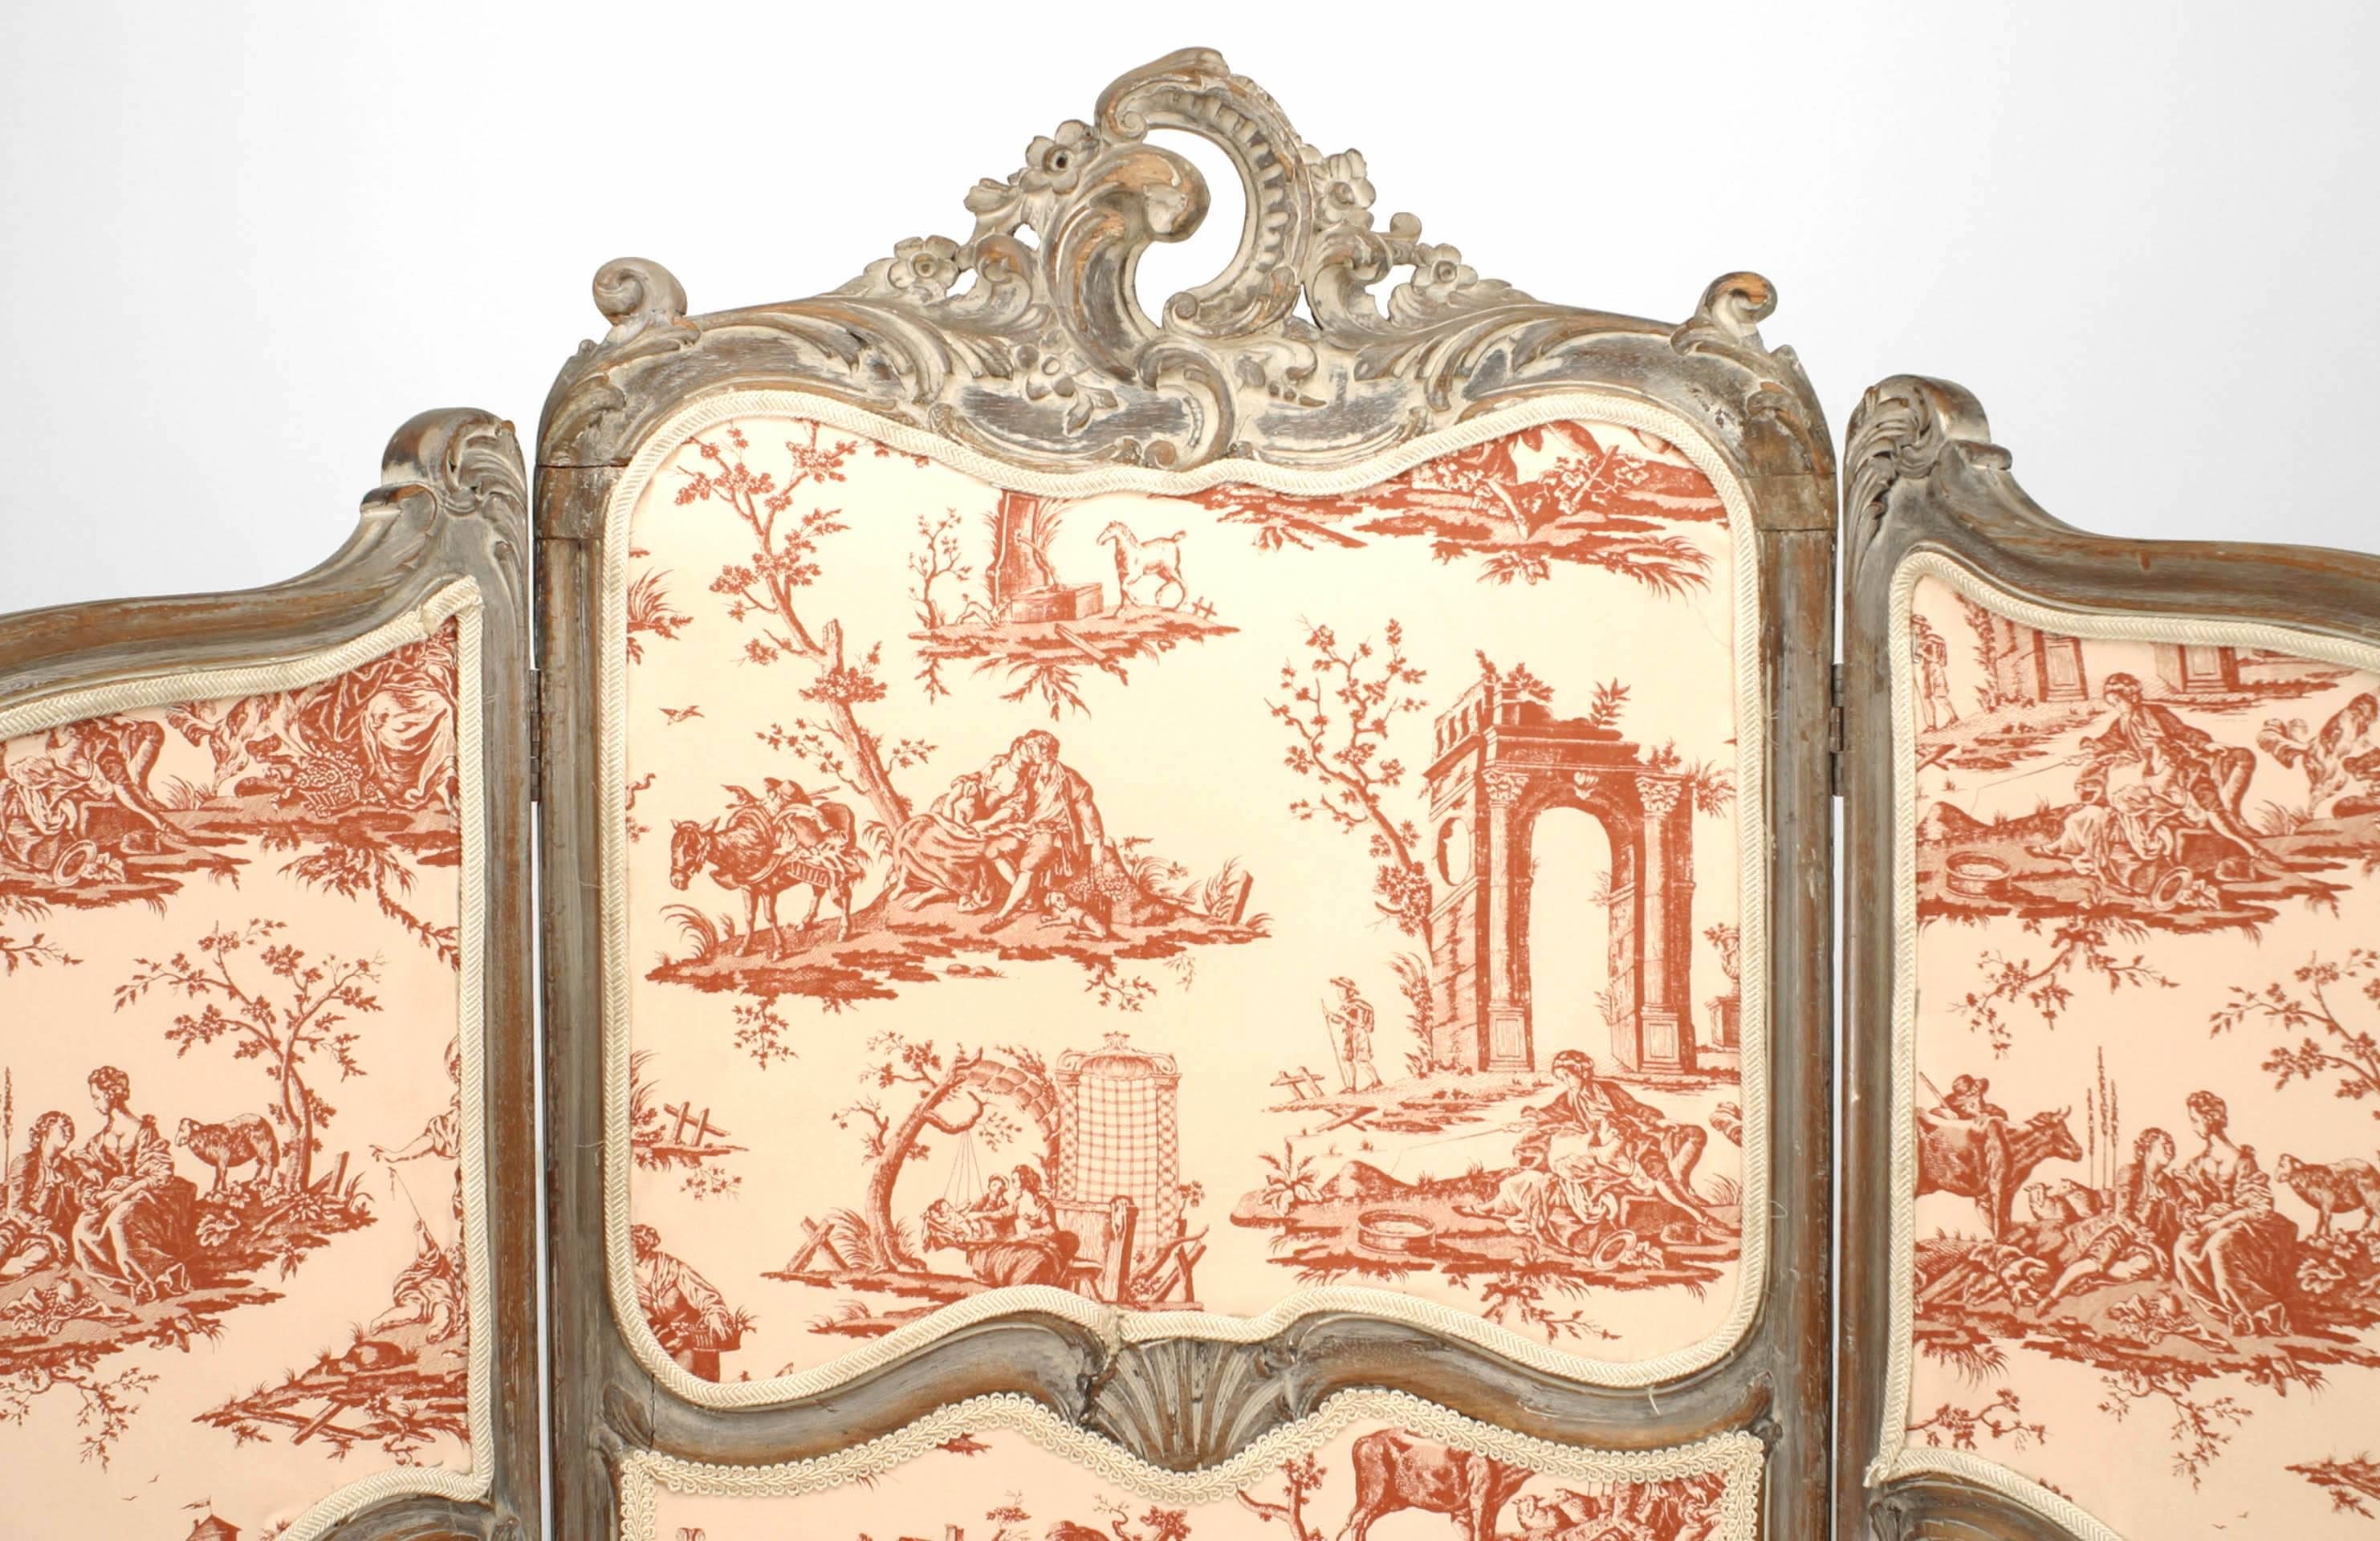 French Louis XV style (19/20th Century) cerused wooden frame 3 fold screen with white satin upholstered panels in a red toile print.
